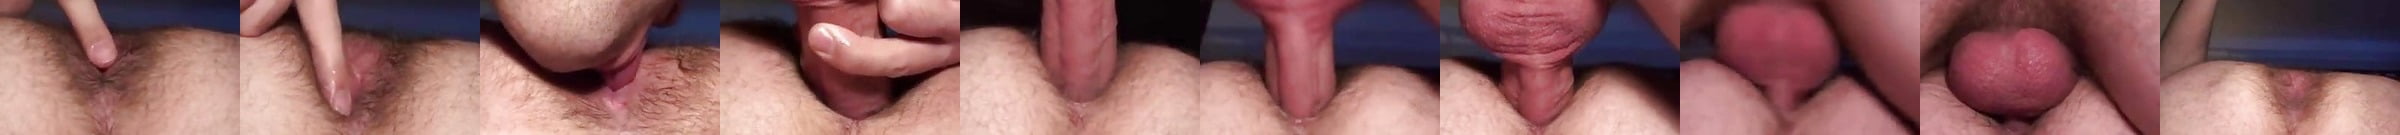 Cum Inside His Ass Then Lick It Out Gay Porn 66 Xhamster